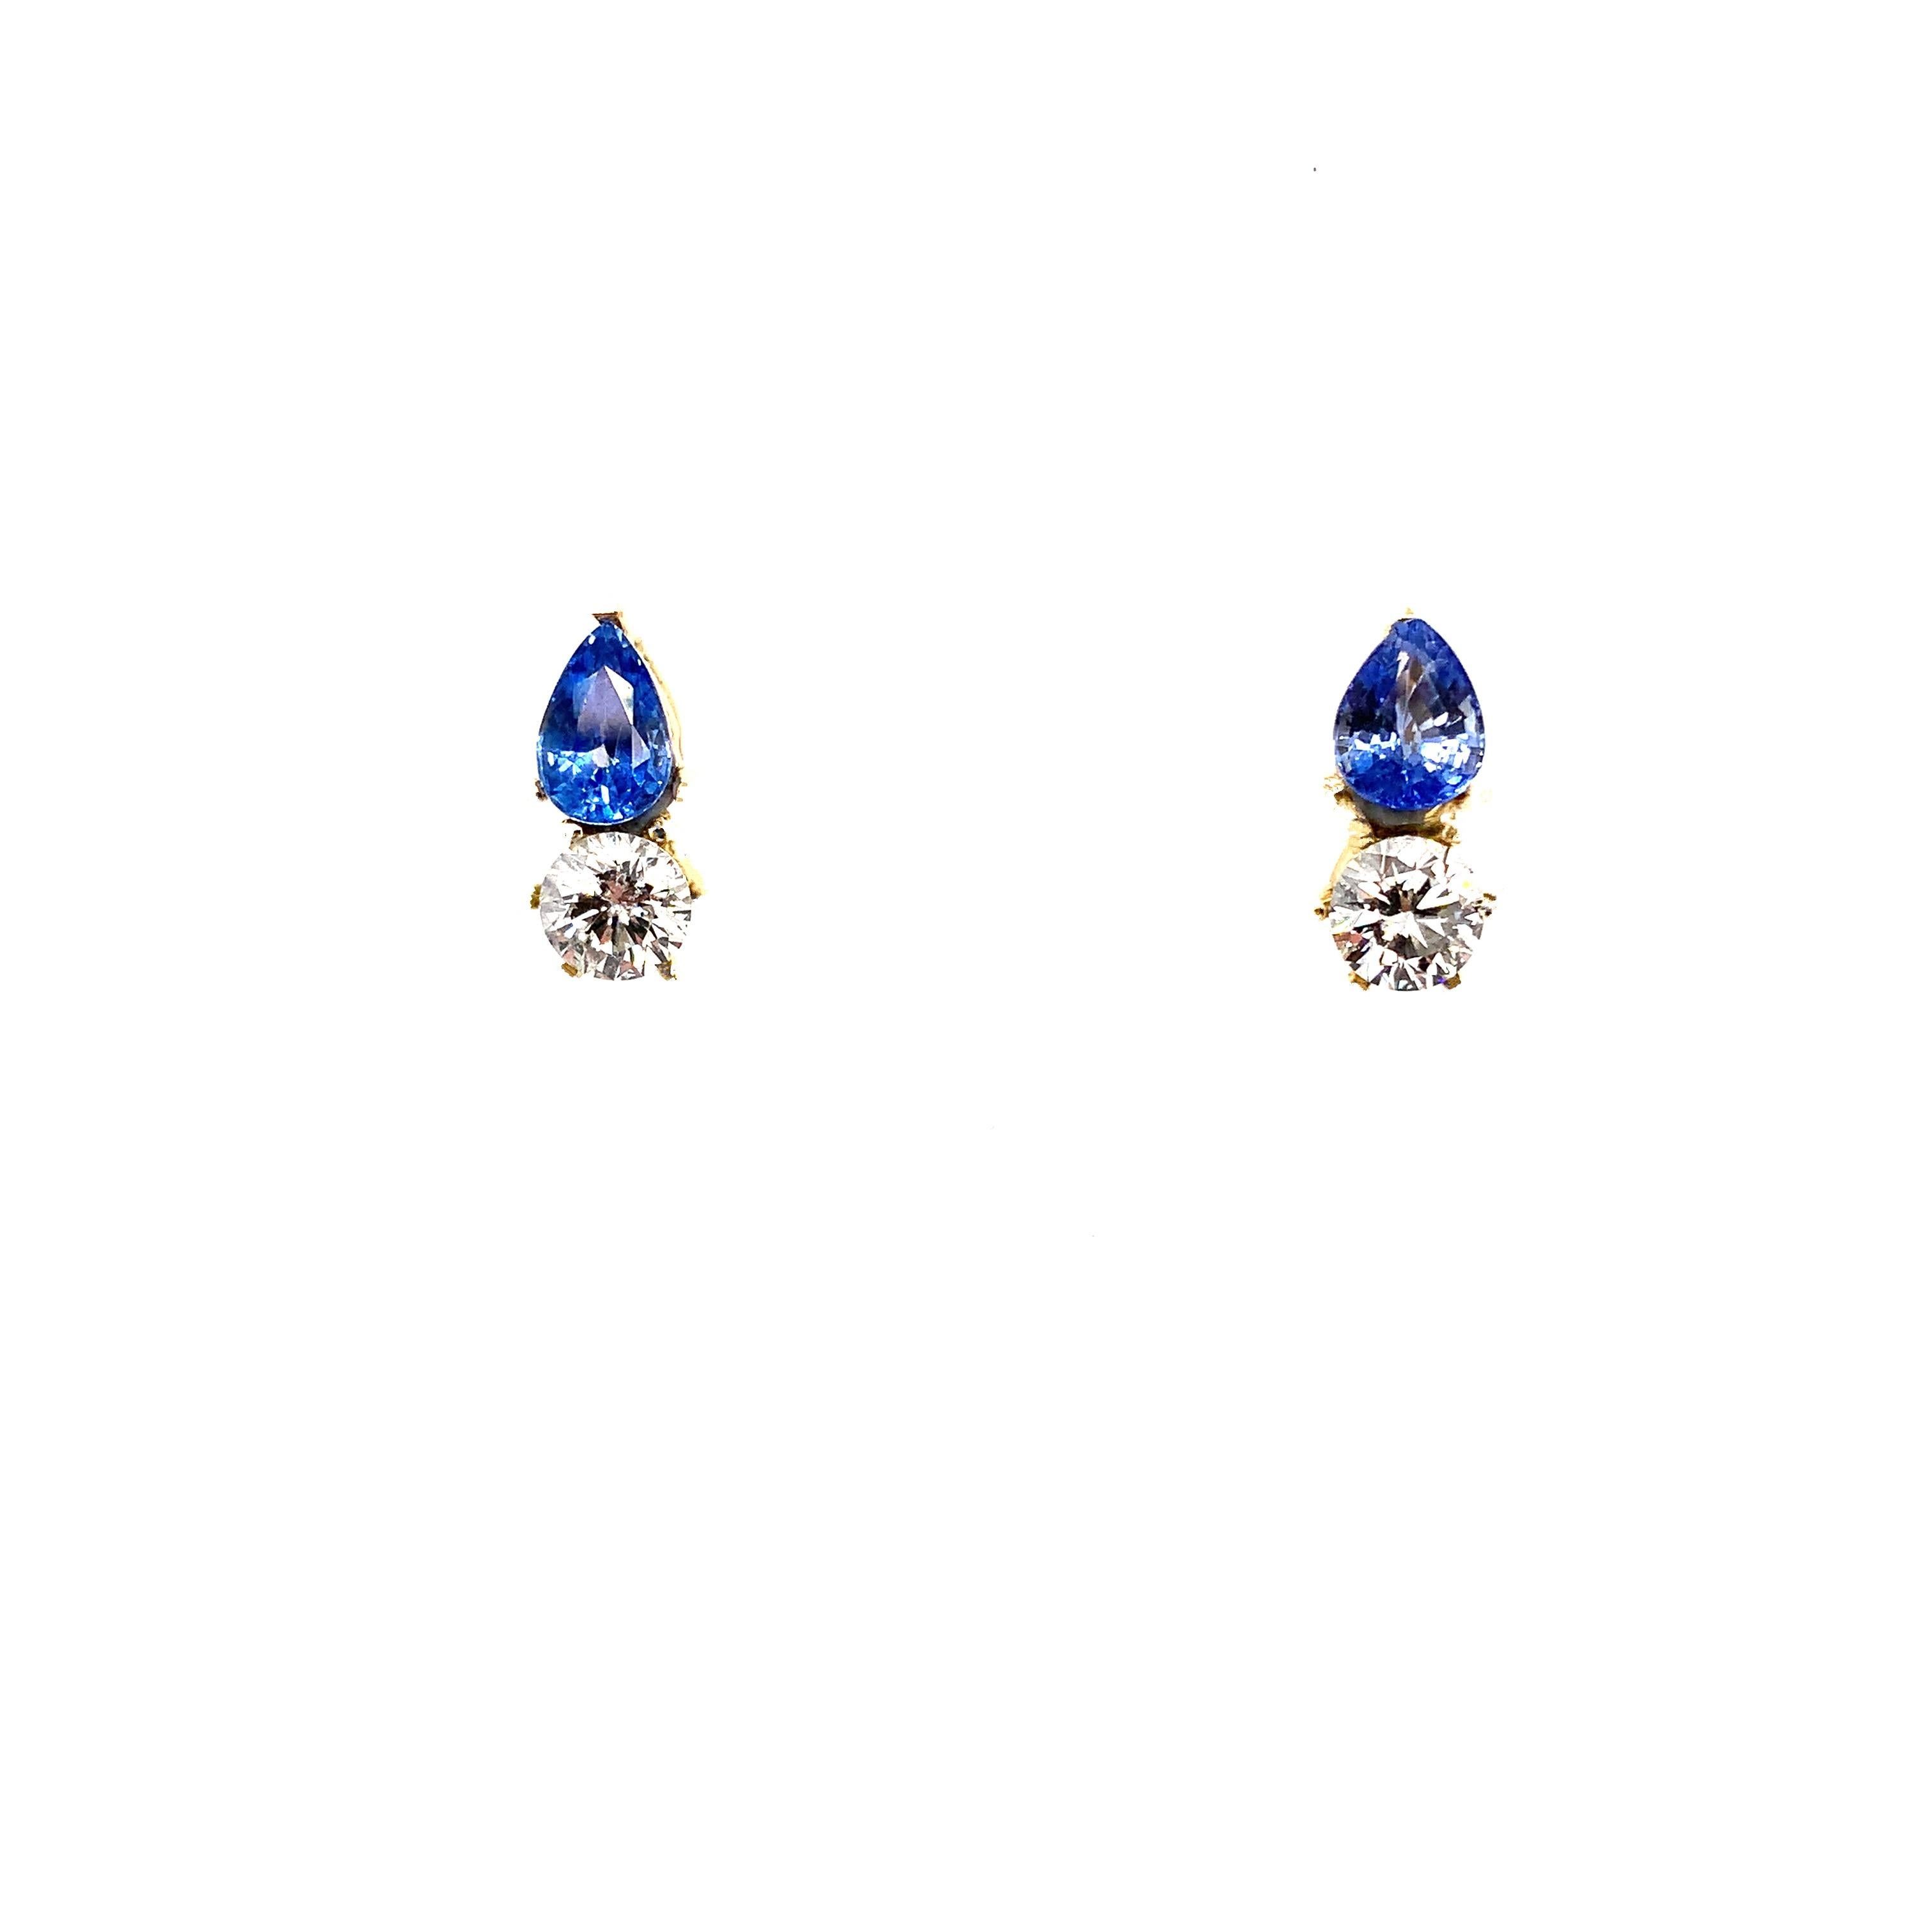 Diamond and sapphire stud earrings 18k yellow gold 
Blue sapphire pear shaped gemstone natural untreated total weight 1.20ct
Art deco blue sapphire and diamond stud earrings 18k yellow gold 
Round diamond G colour VS1 clarity 1.21ct 
Hallmarked,